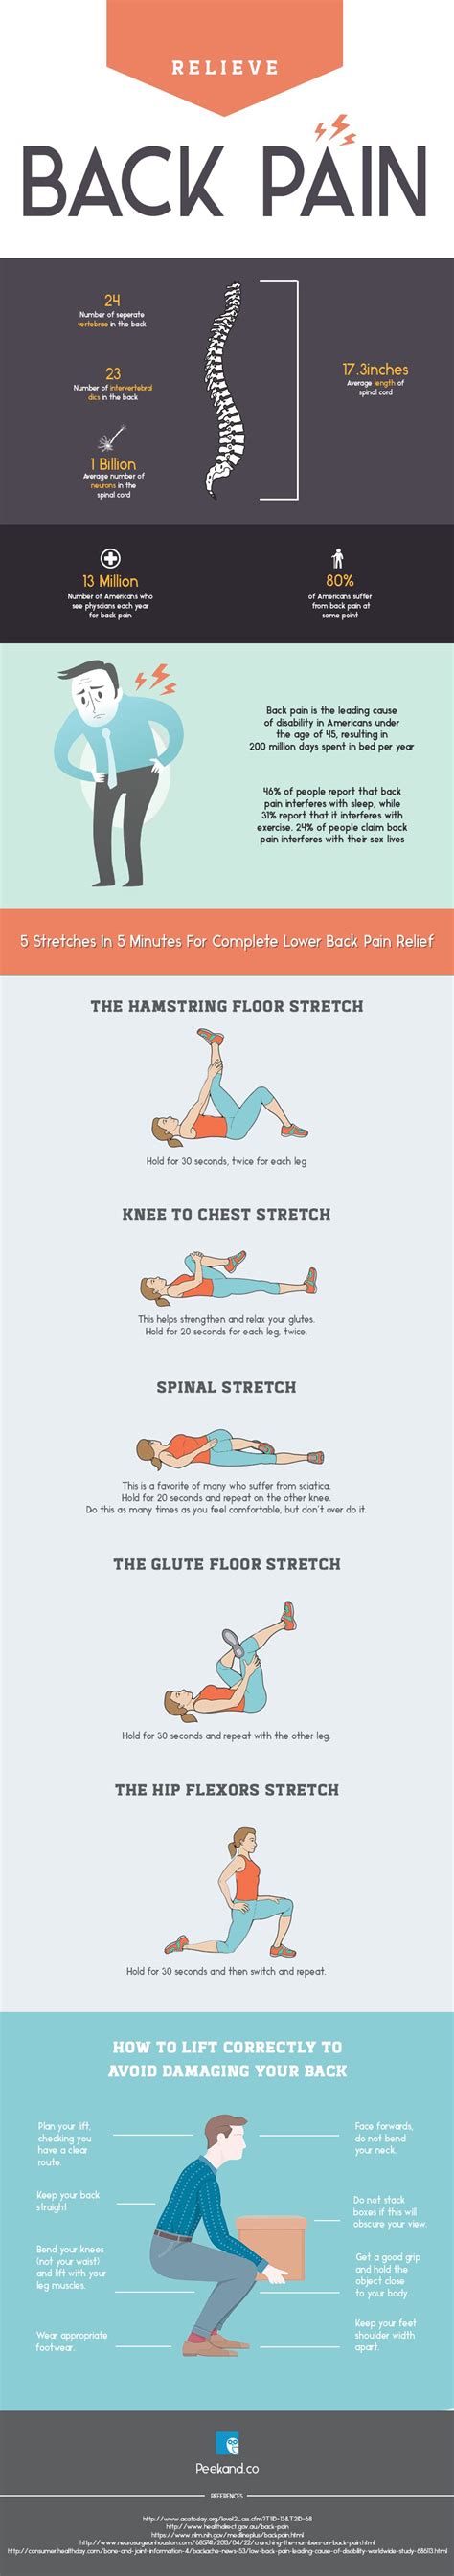 How To Relieve Back Pain Infographic